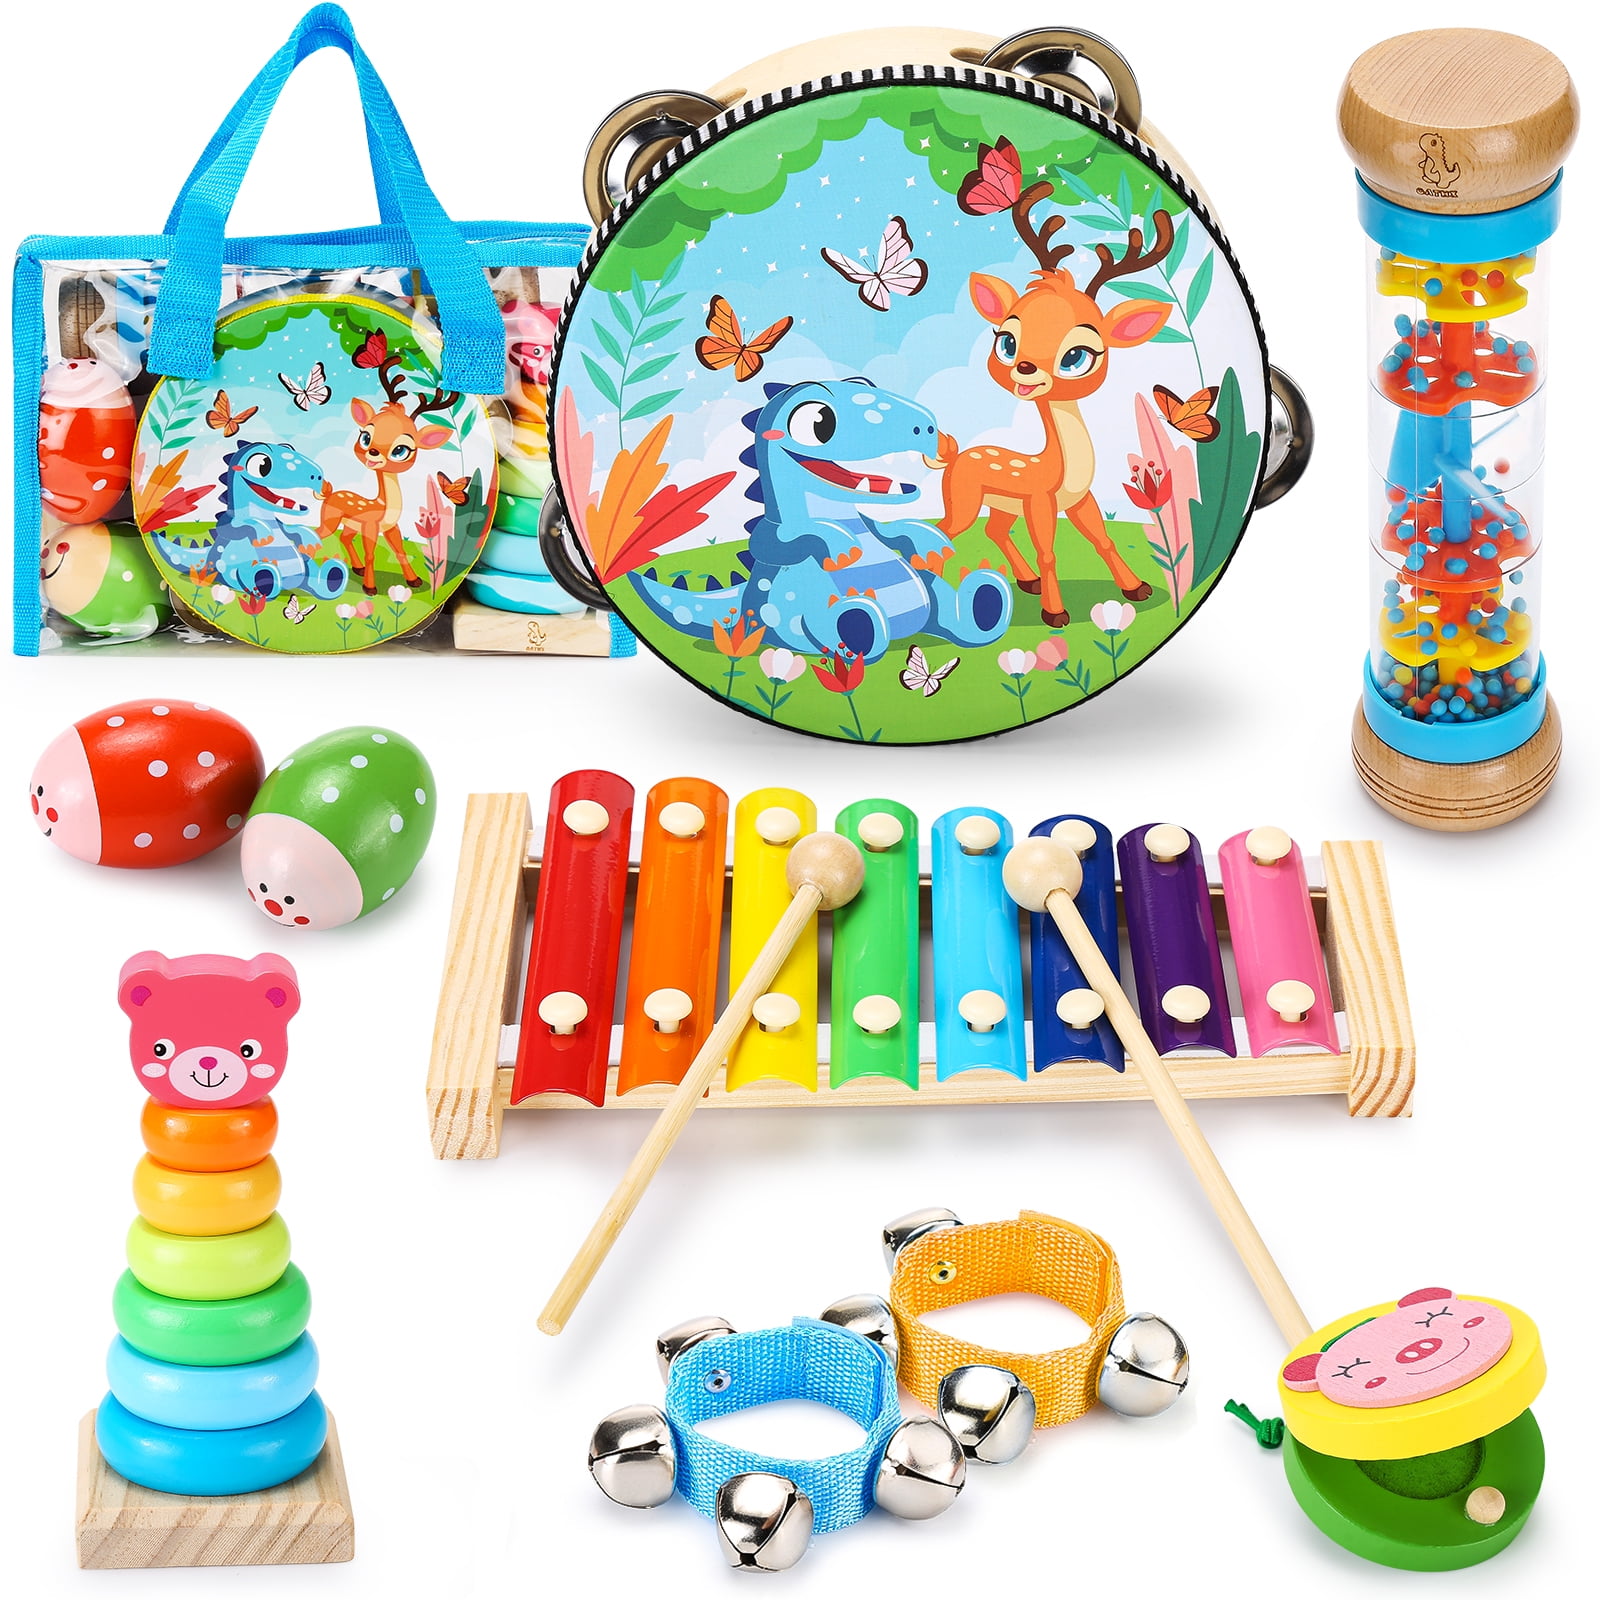 18 pcs Musical Instruments Set for Toddler and Preschool Kids Promotes Early Development and Educational Learning. Wooden Percussion Toys for Boys and Girls Includes Xylophone Tomi Music Toy 